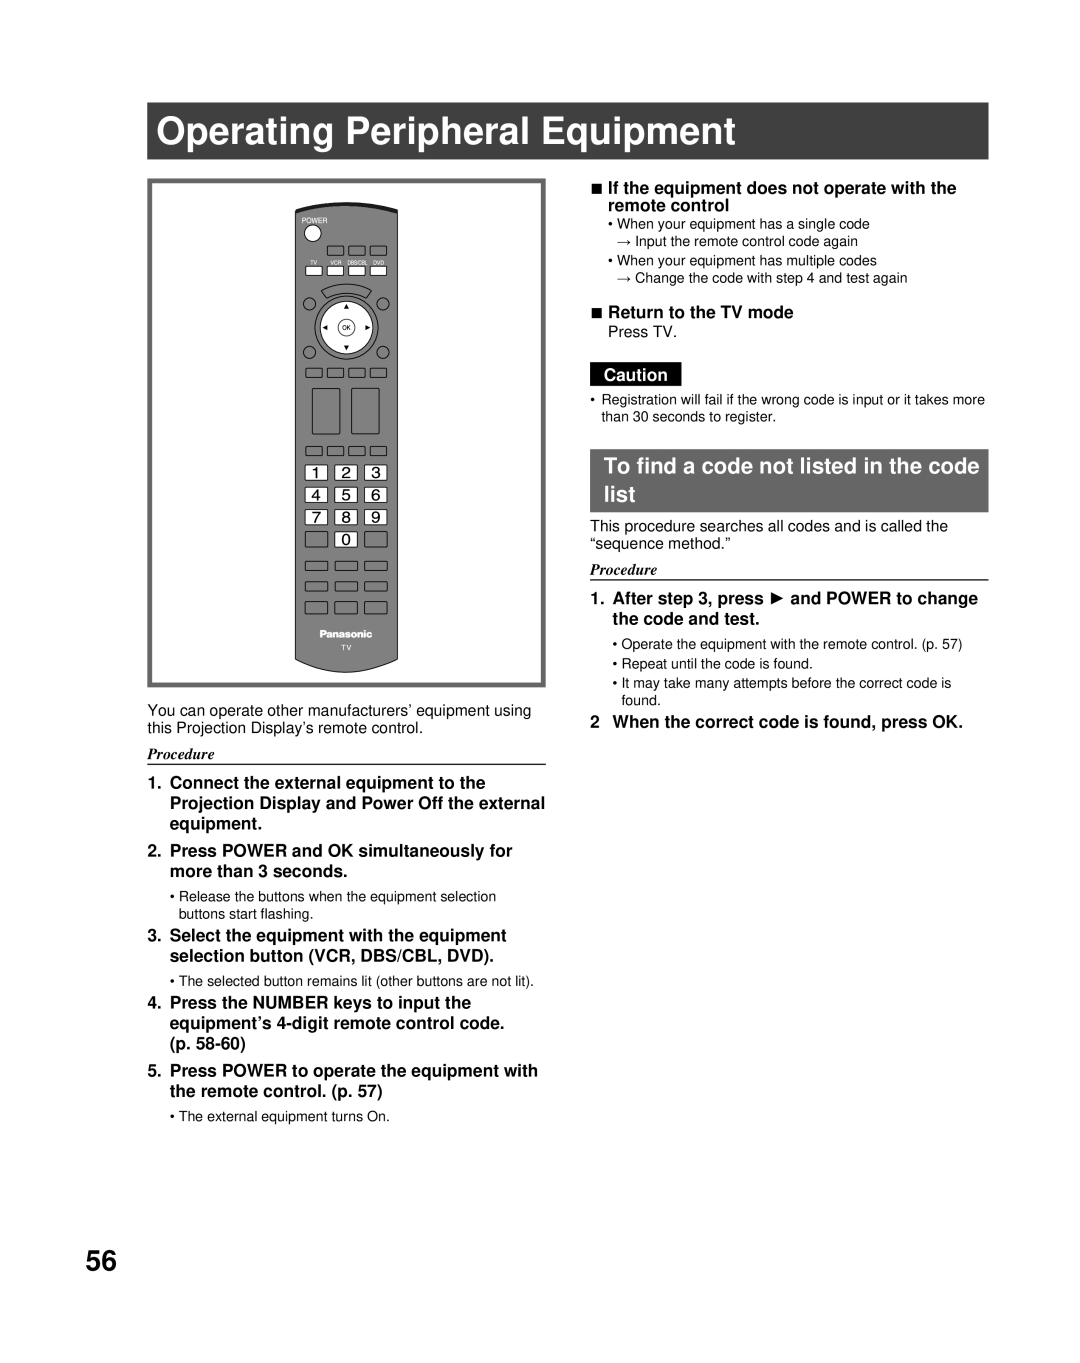 Panasonic PT-50LCZ70 Operating Peripheral Equipment, To find a code not listed in the code list, Return to the TV mode 